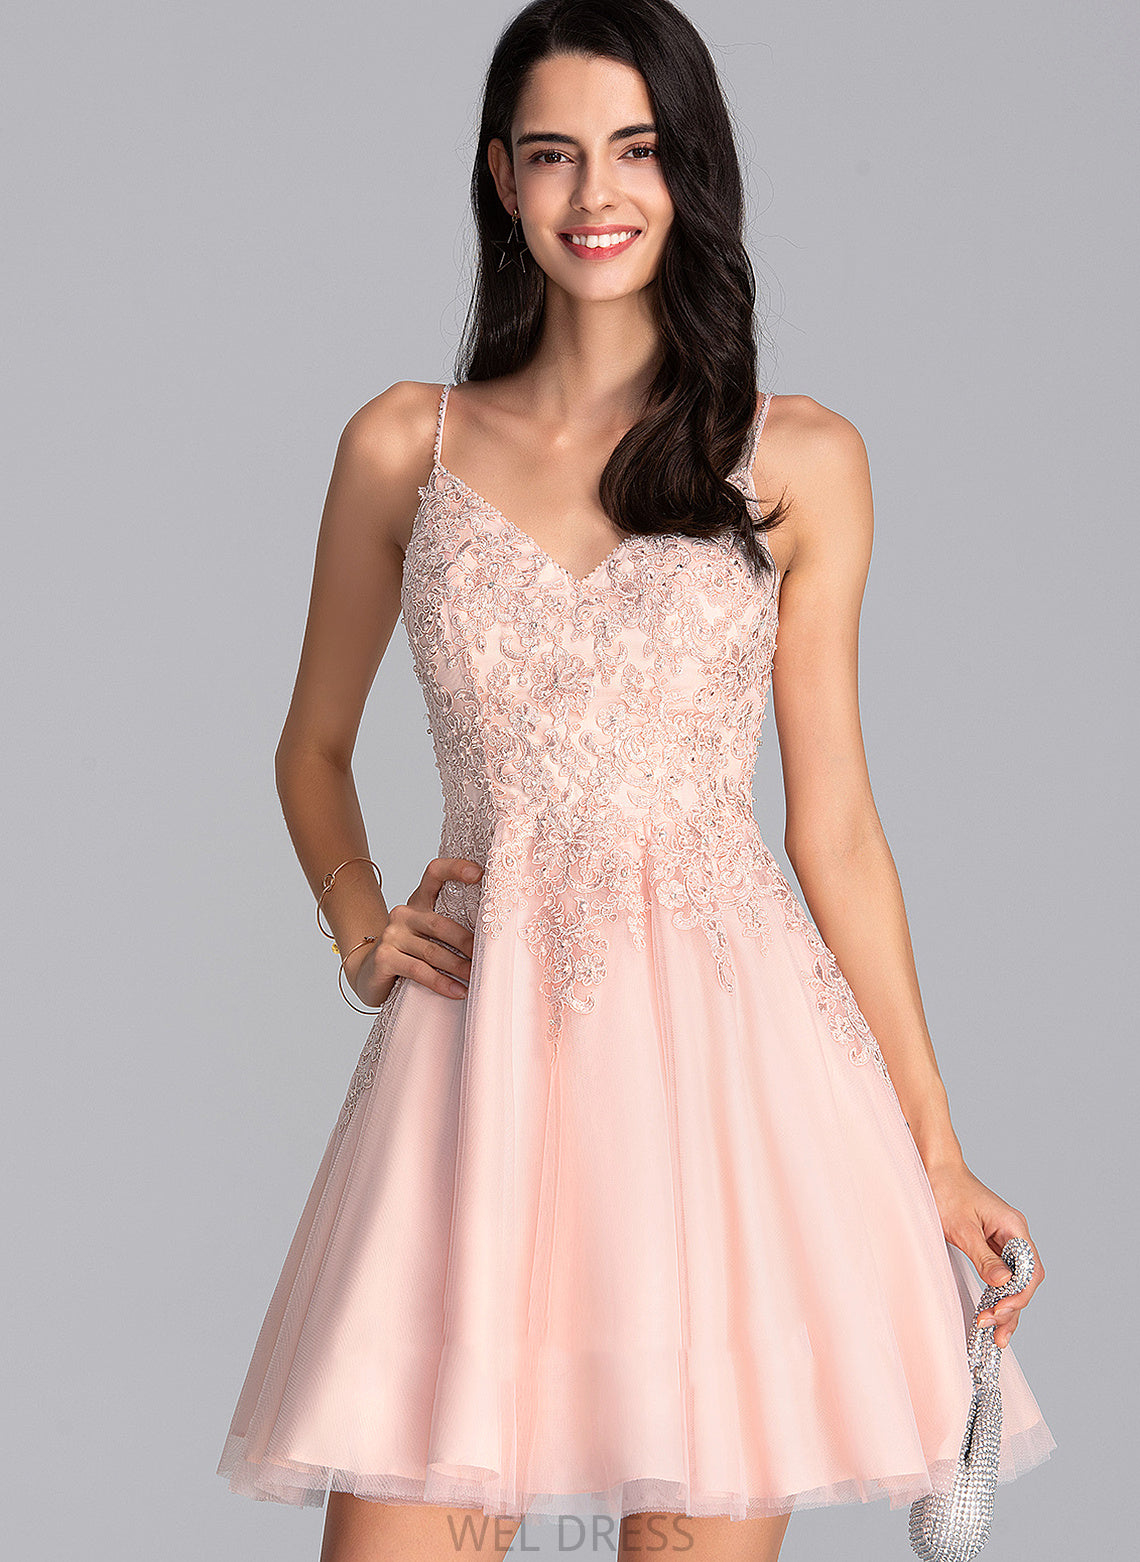 Homecoming Homecoming Dresses With Lace A-Line Short/Mini Dress Beading Toni Tulle V-neck